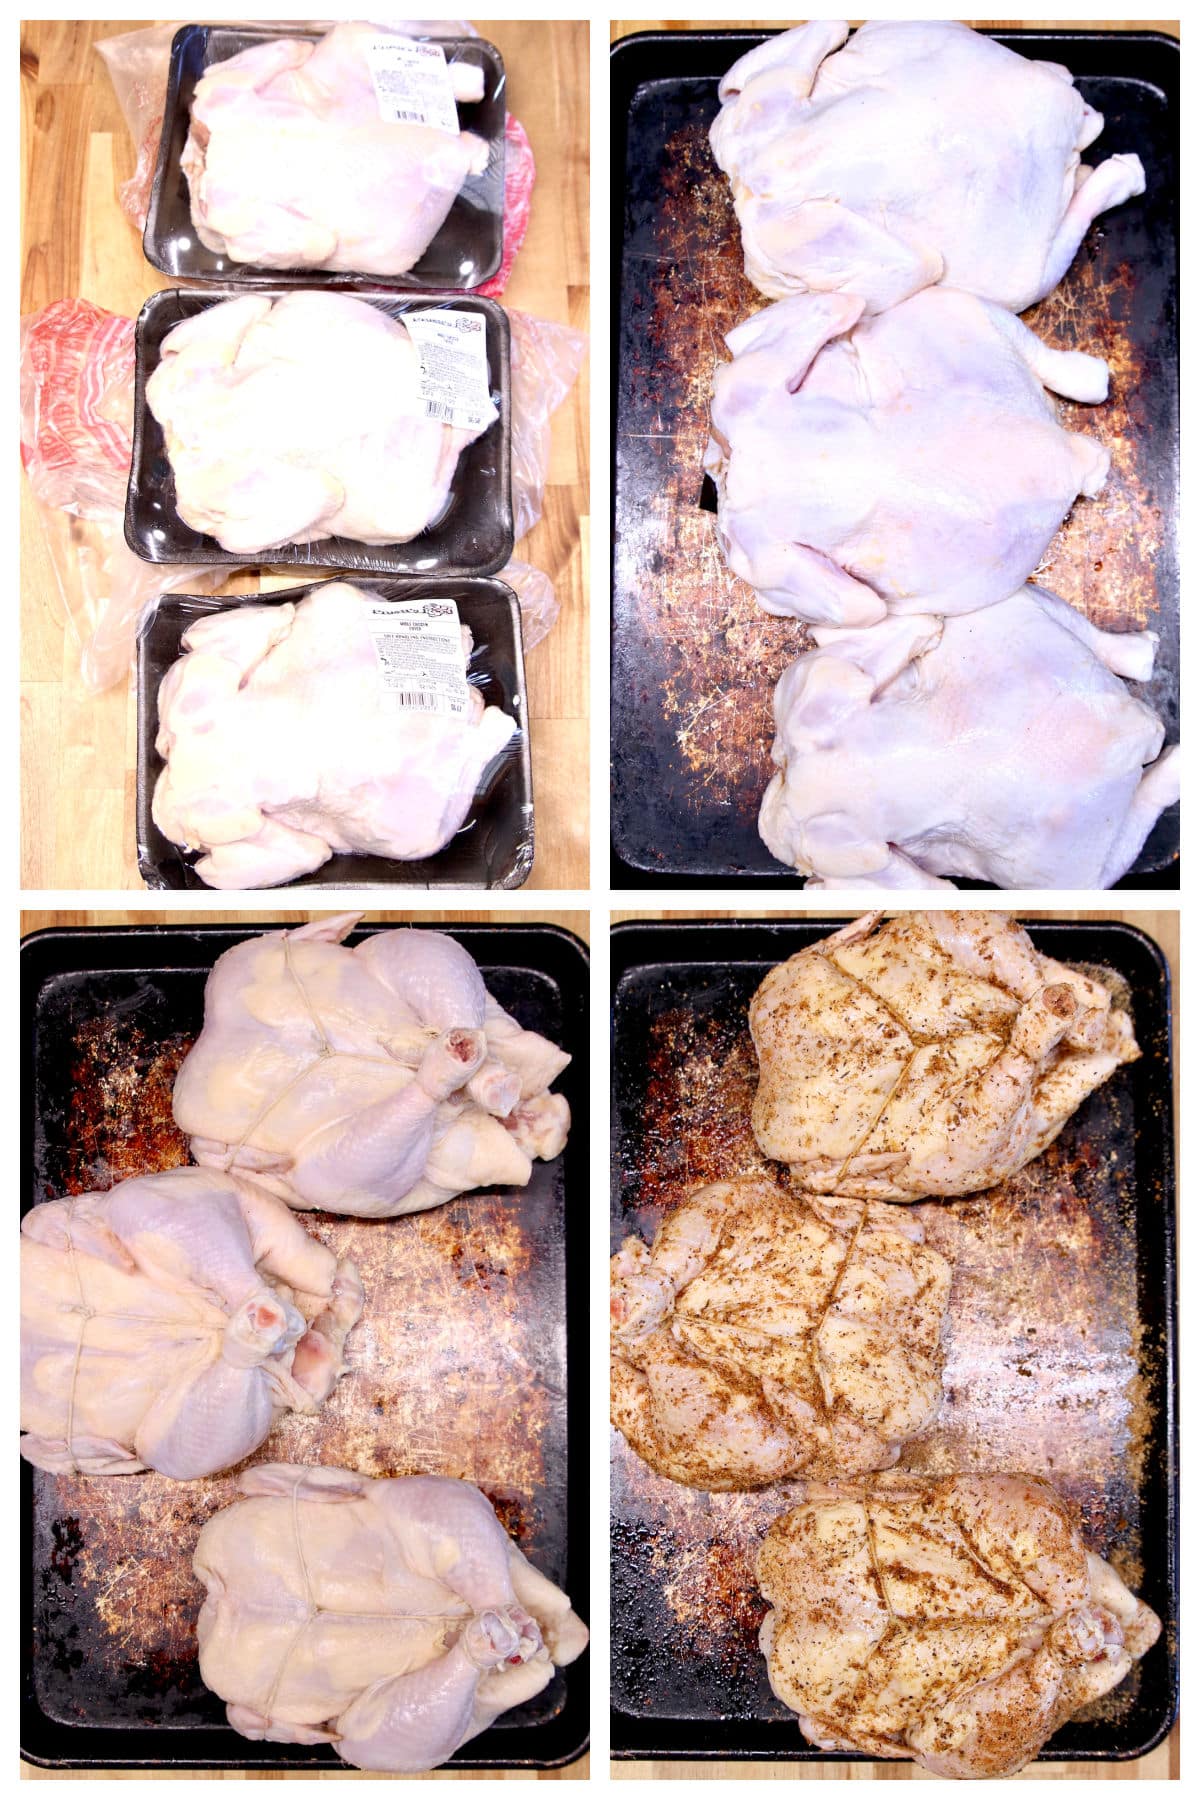 Collage preparing whole chickens for grilling.